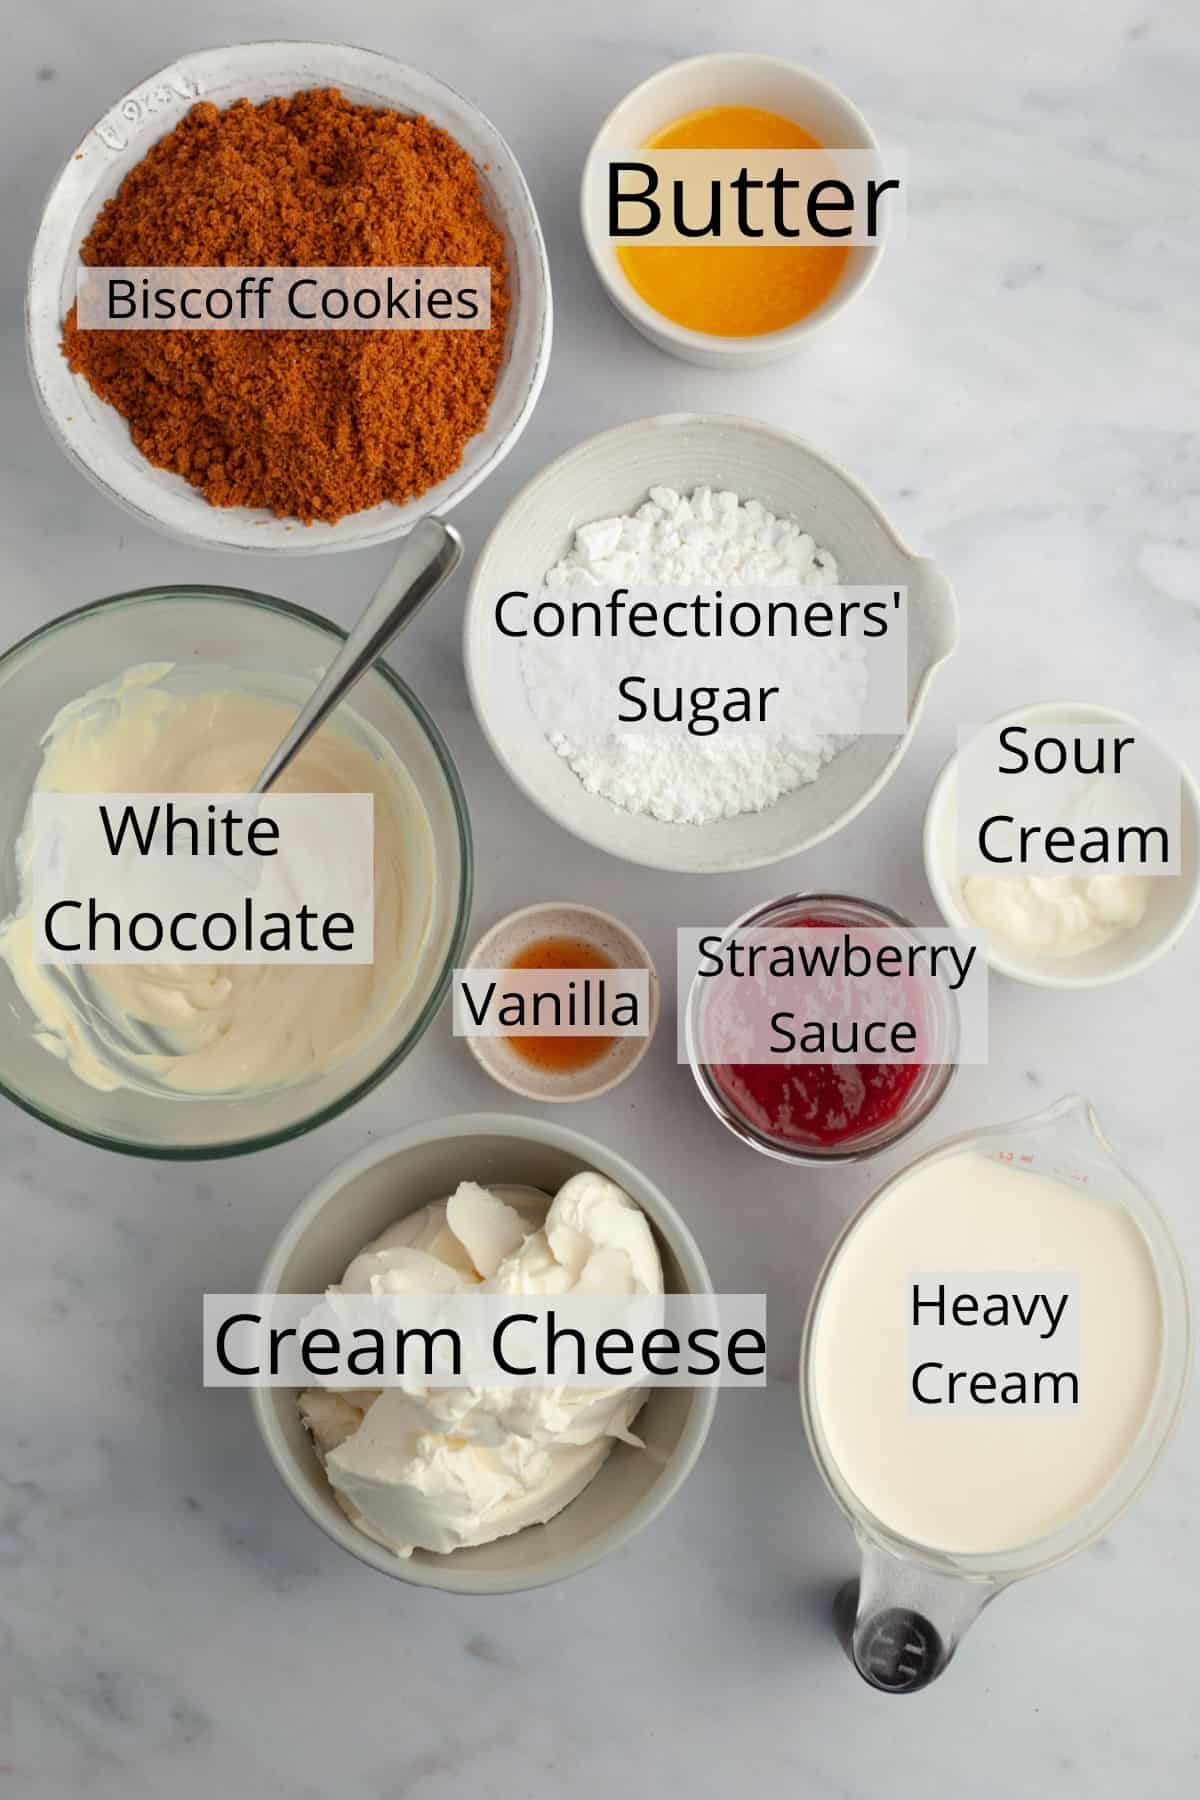 All the ingredients needed to make strawberry white chocolate cheesecake, weighed out into small bowls.